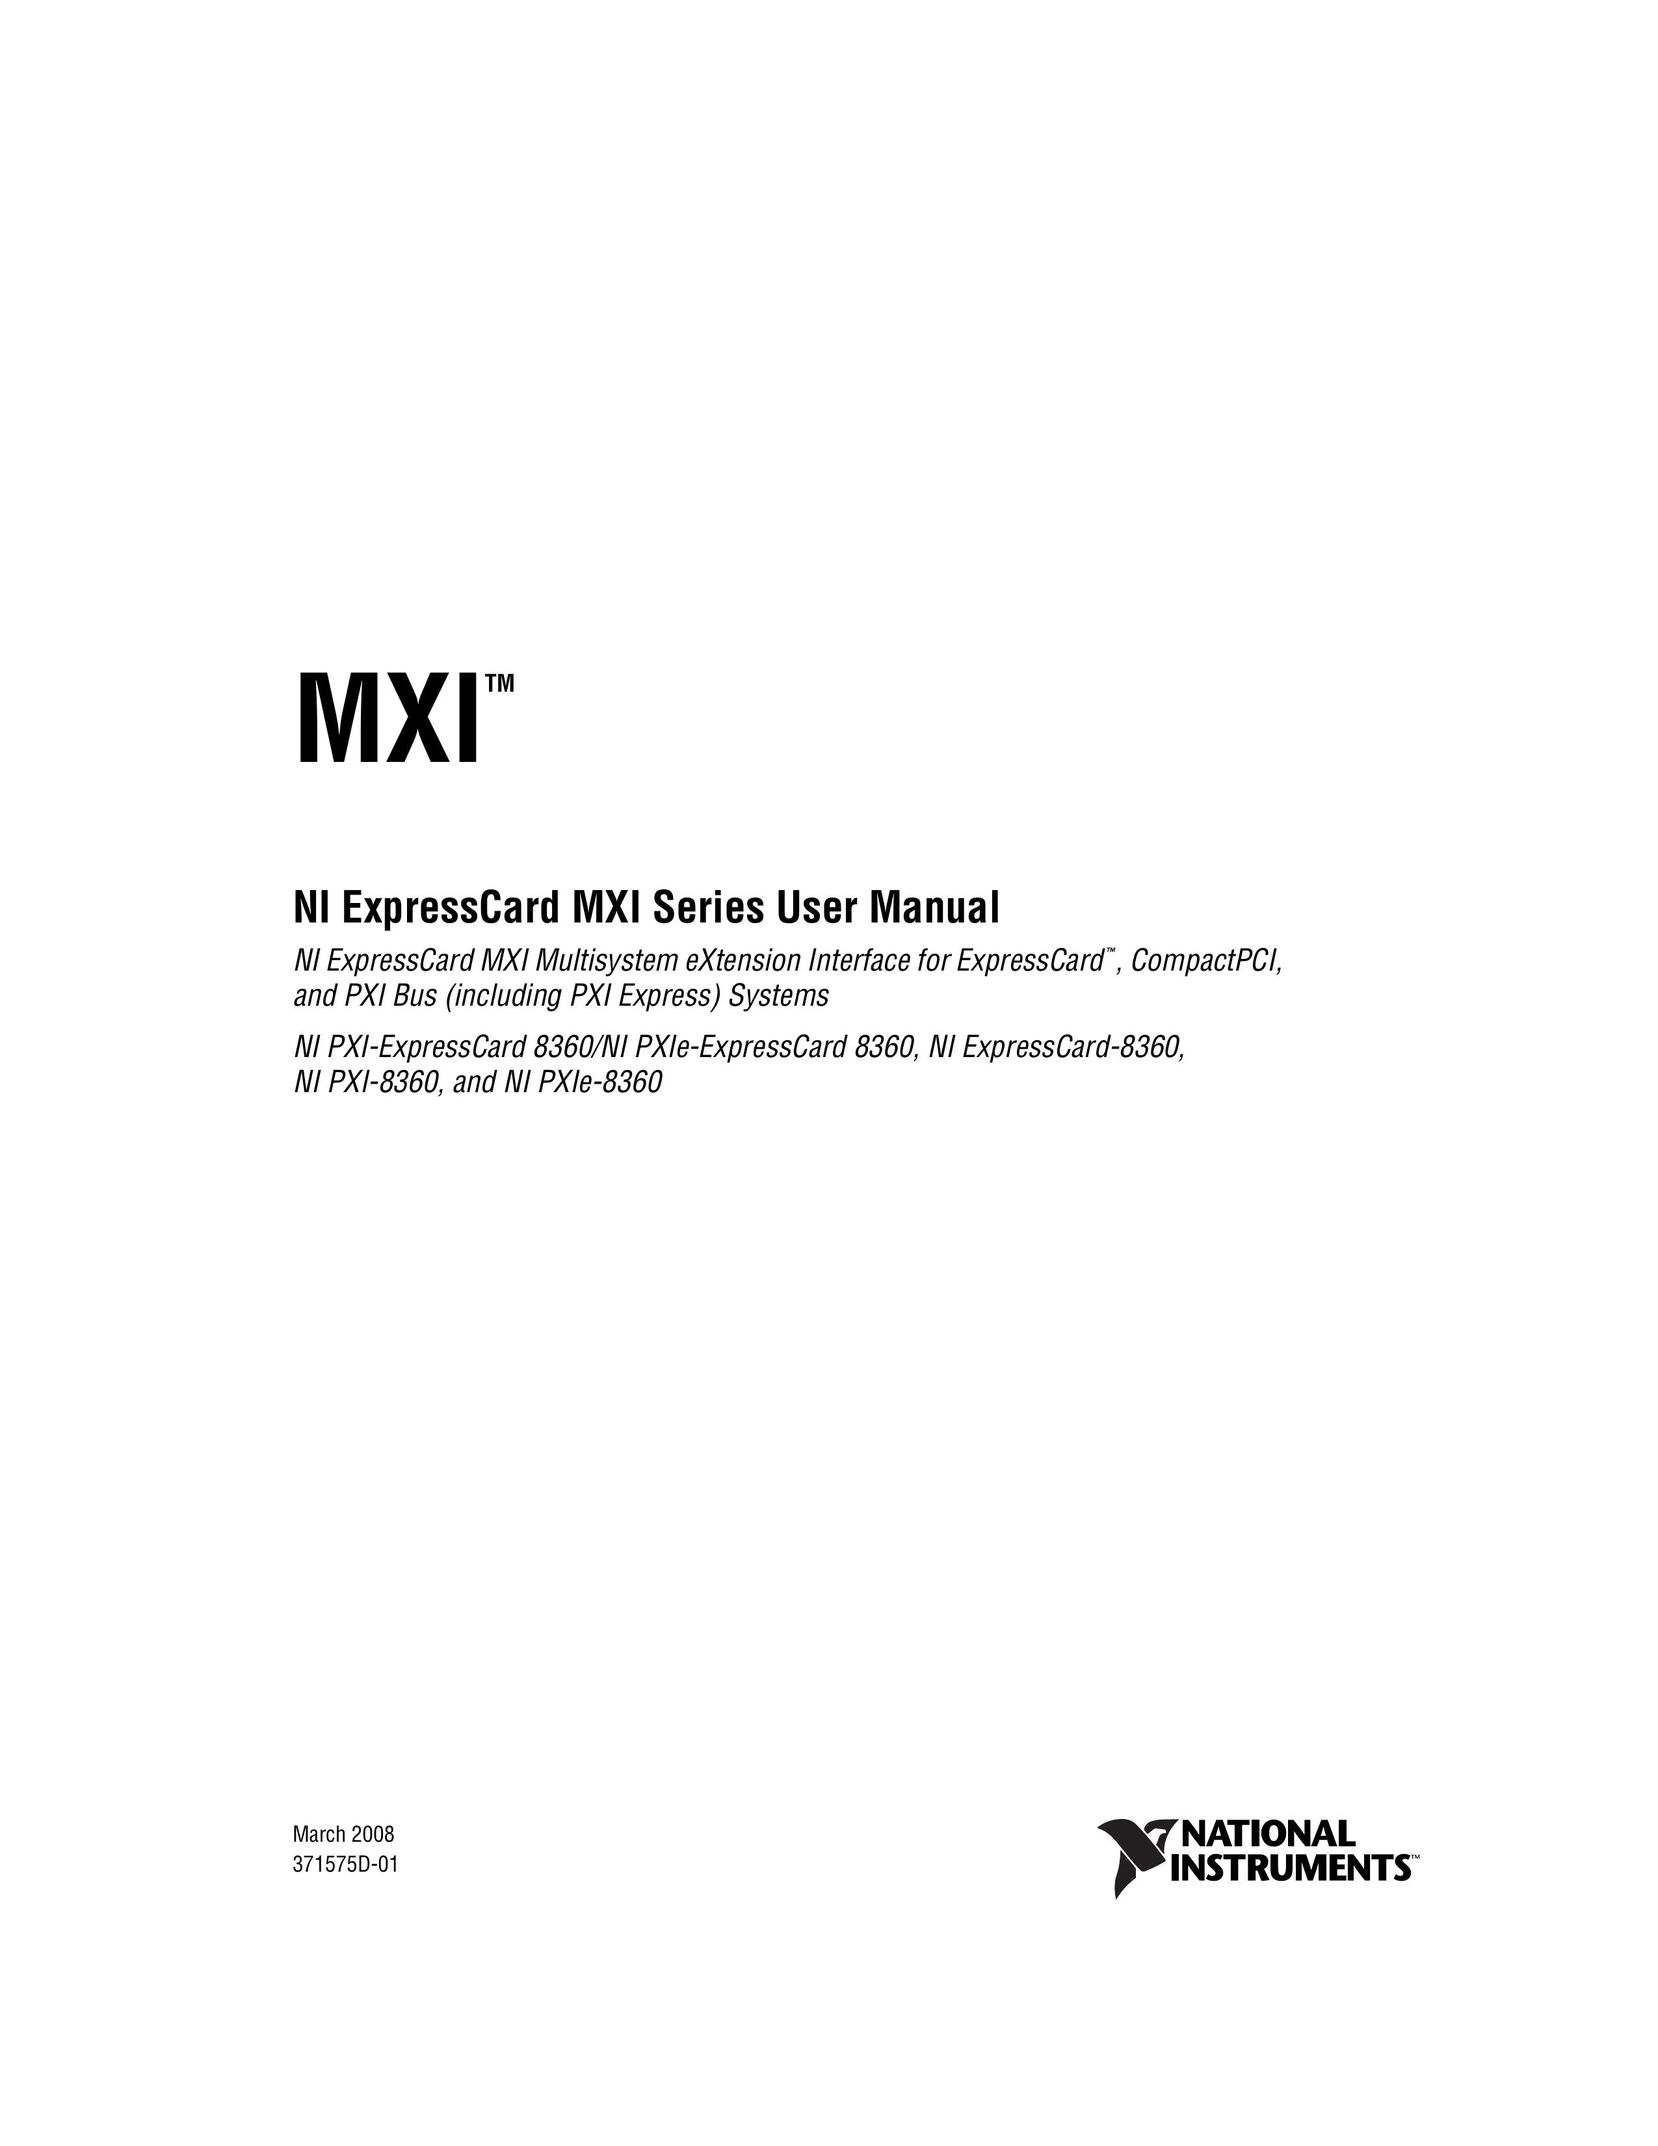 National Instruments MXI Series Network Card User Manual